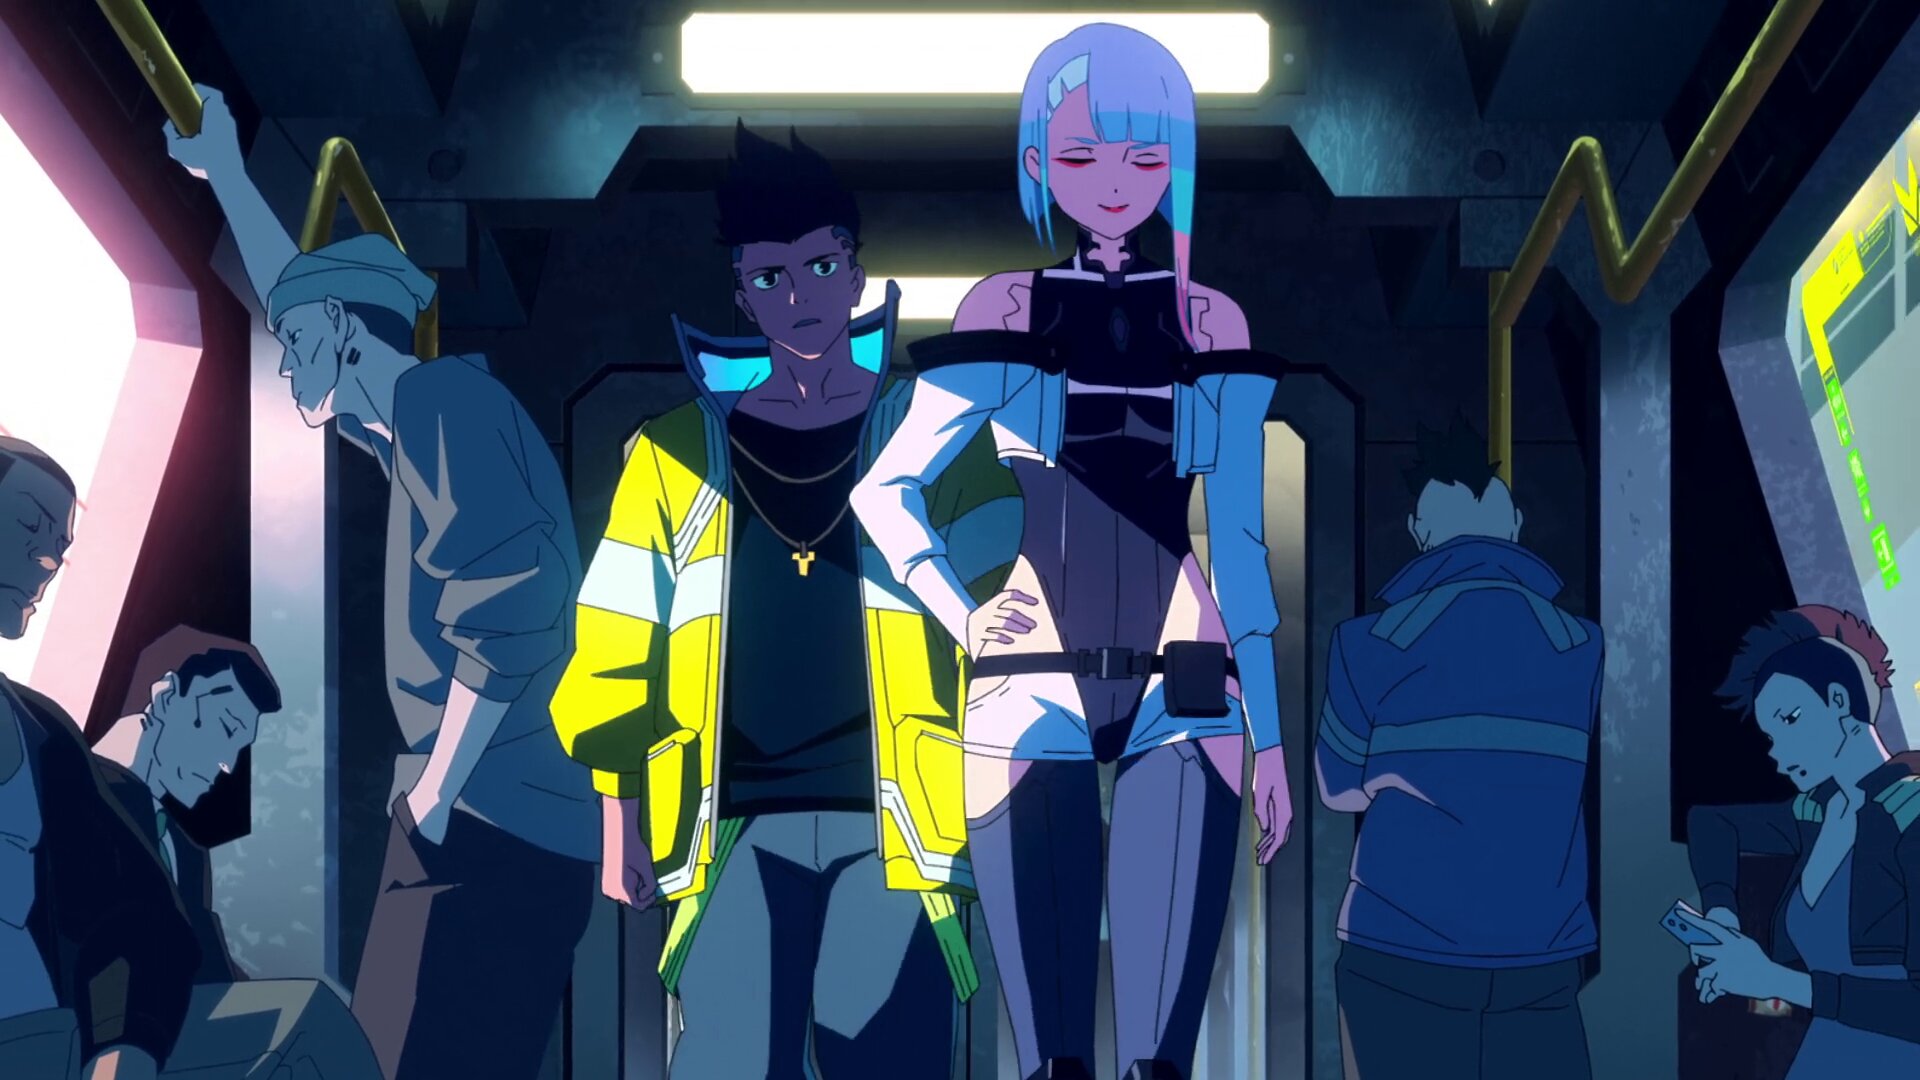 Cyberpunk: Edgerunners Highlights David and Lucy in New Music Video